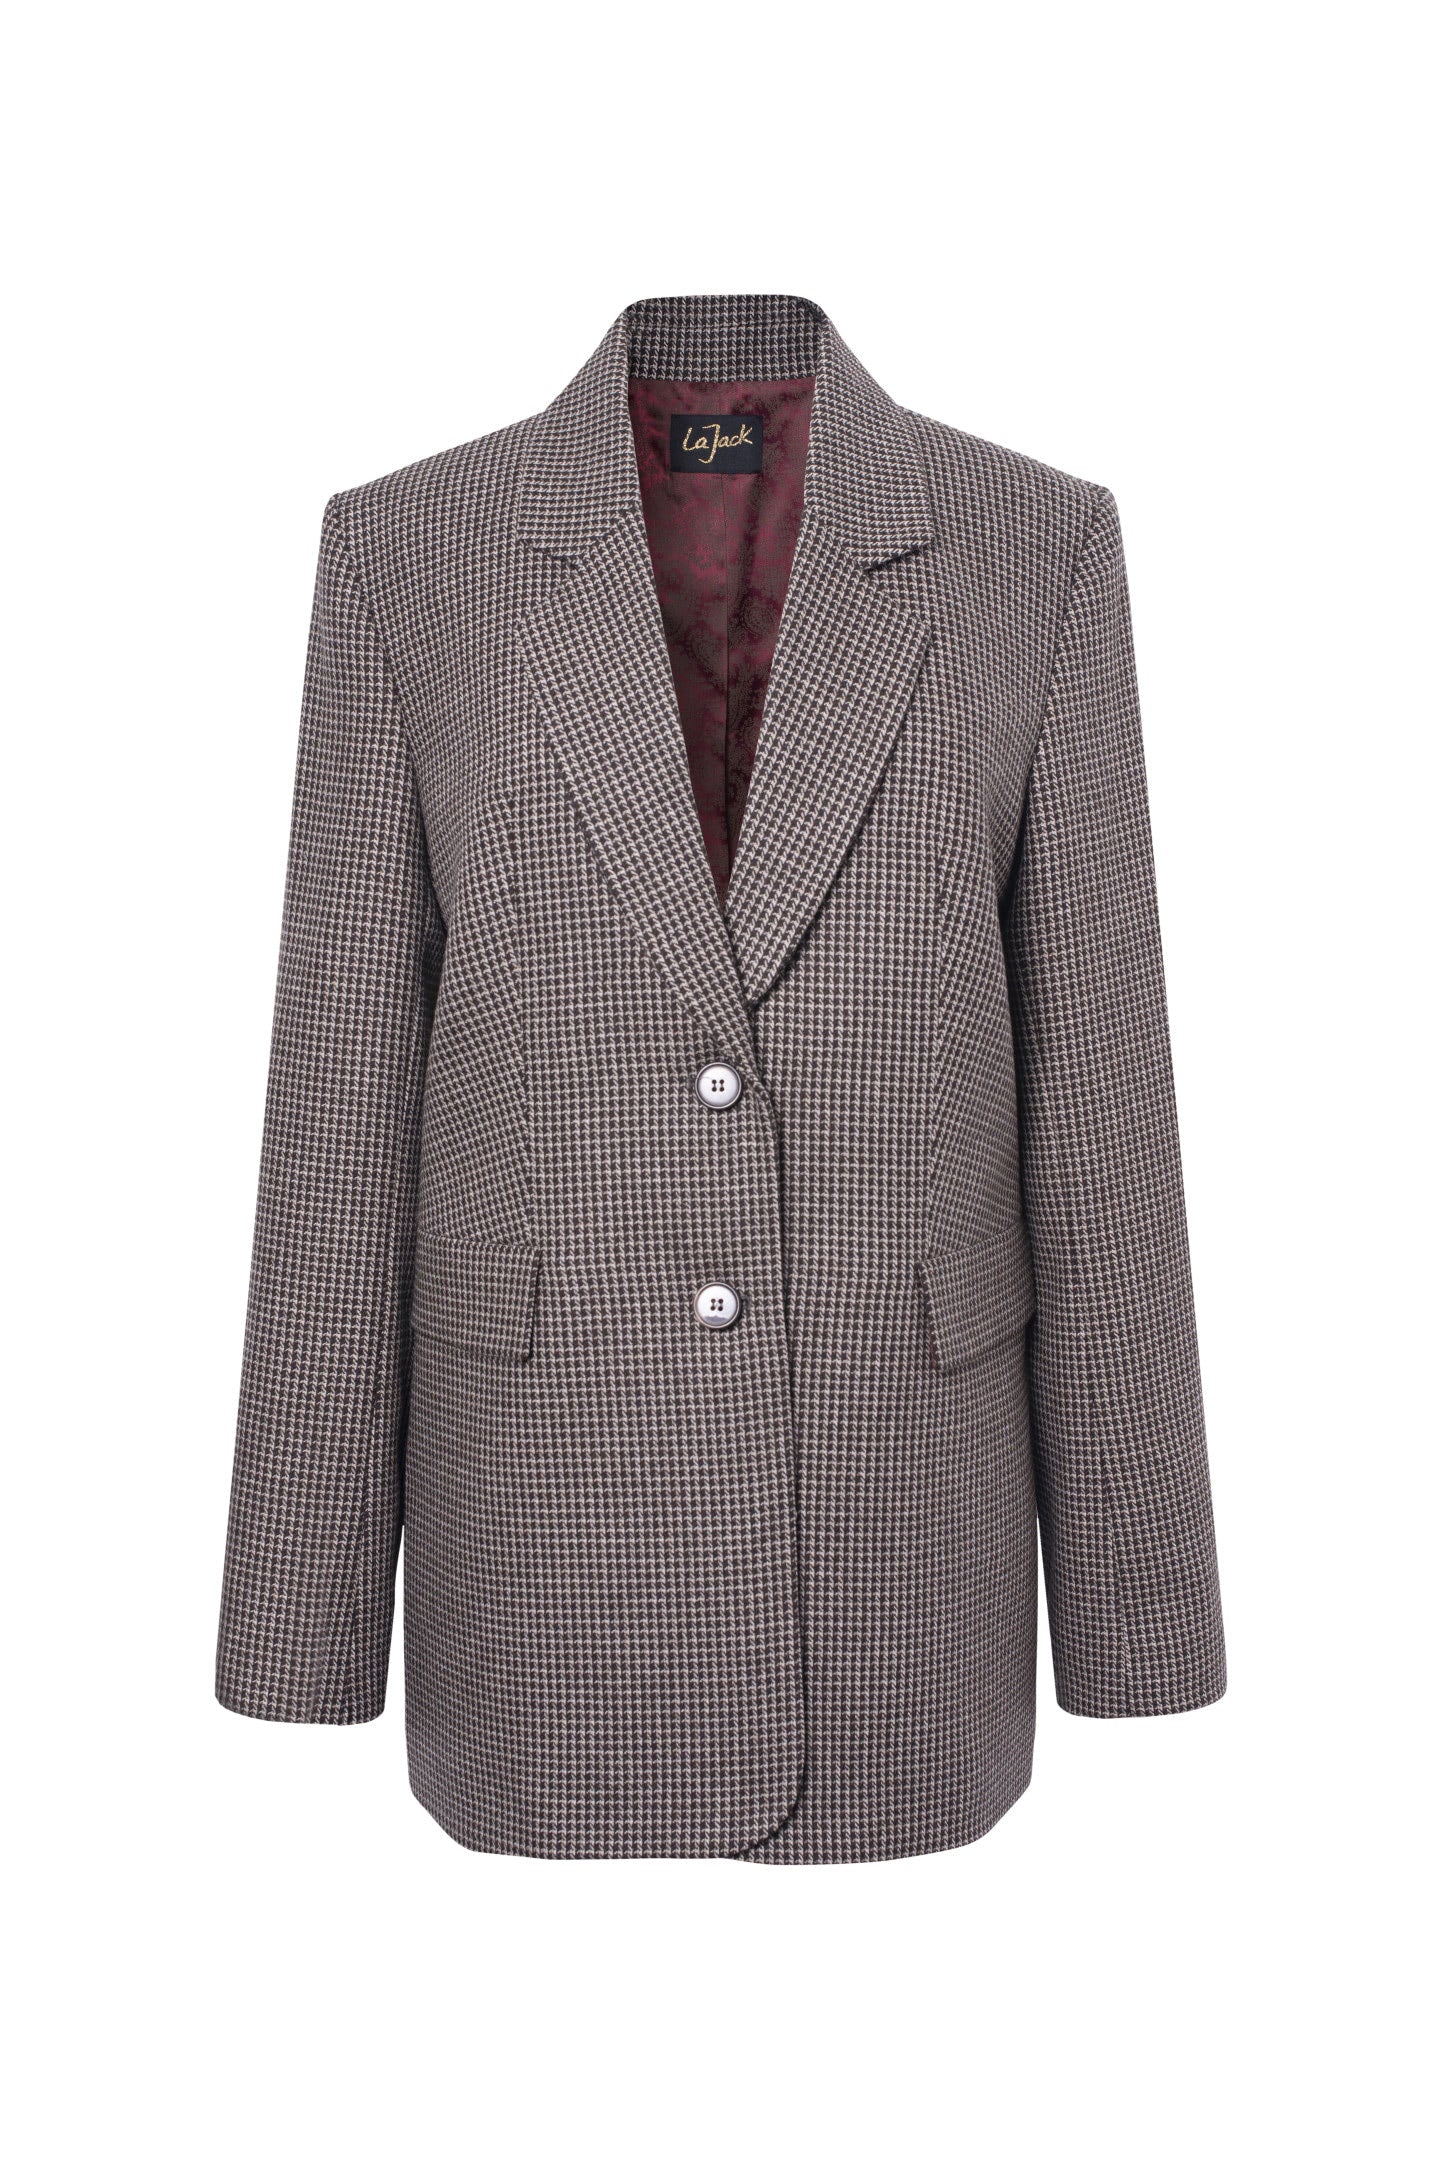 La Cary - Brown Wool & Cashmere Oversized Blazer Jacket wine red cashmere lining